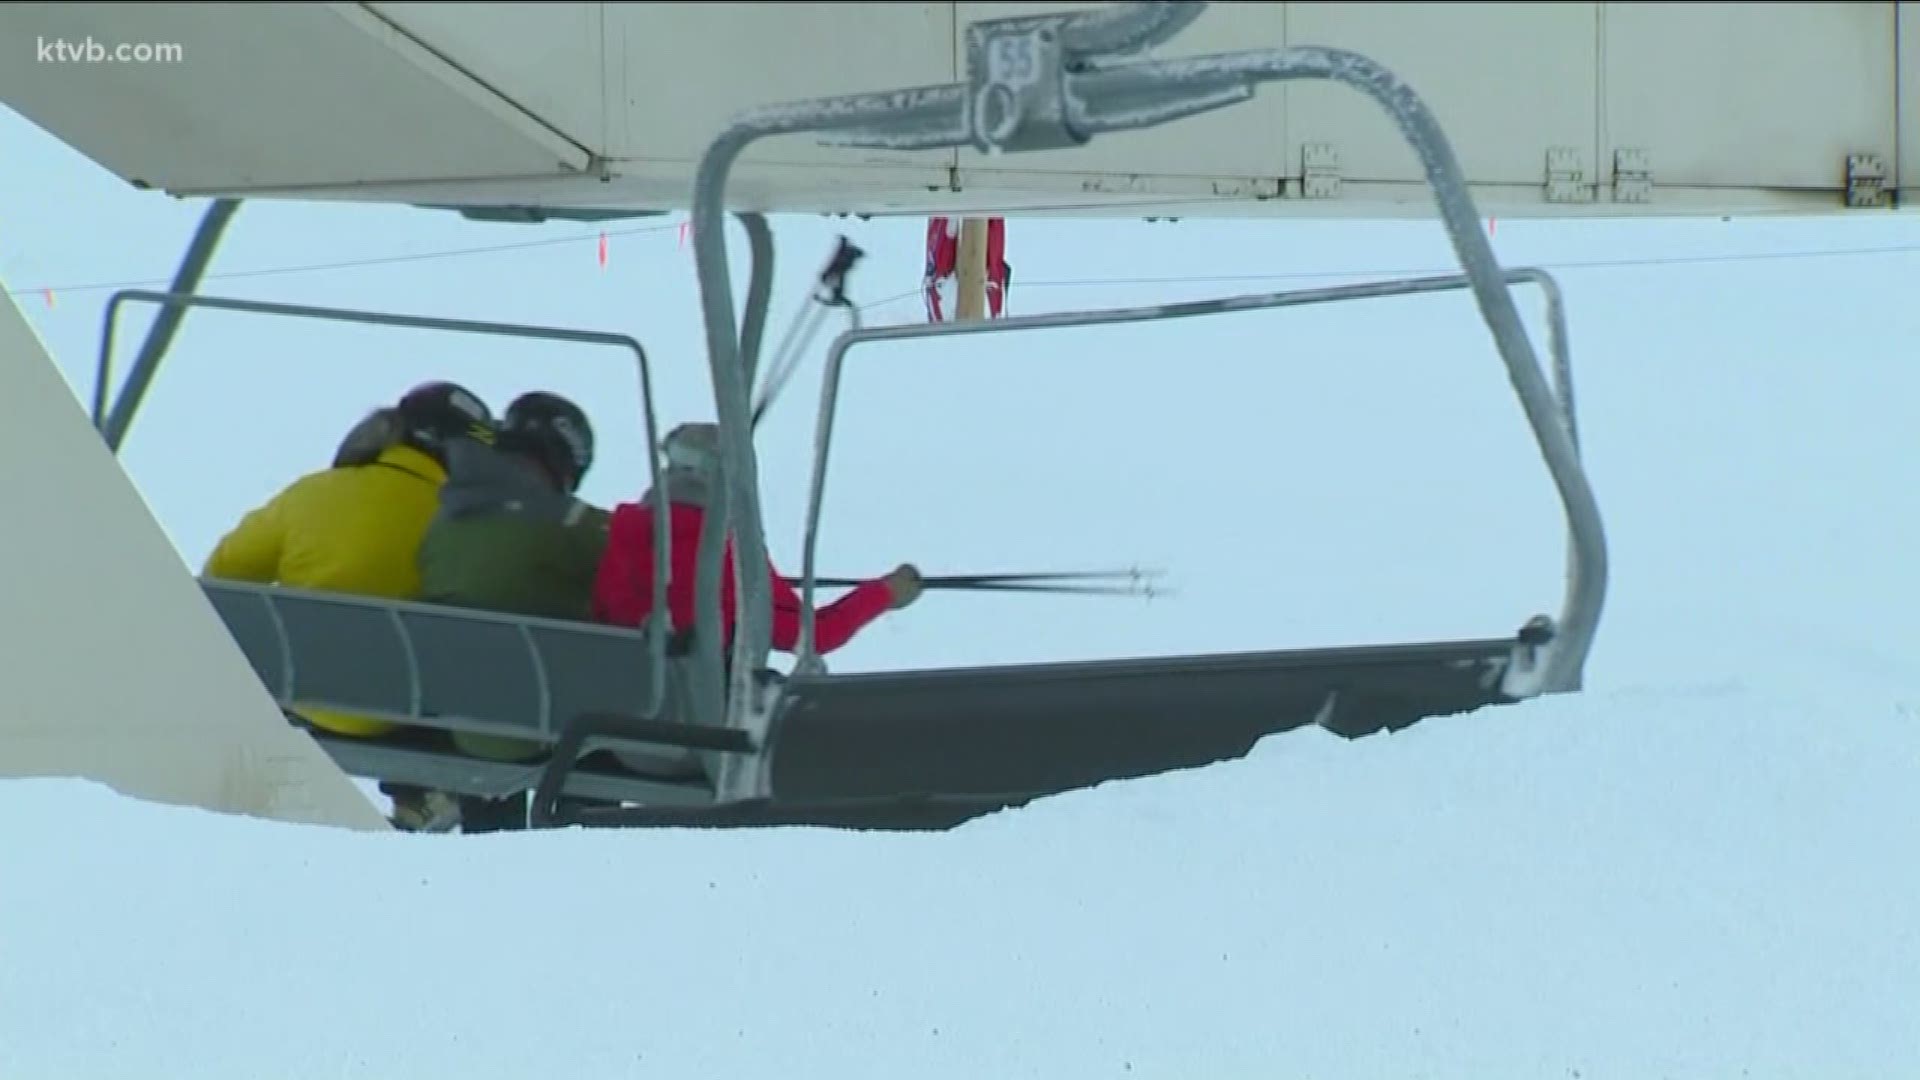 The Morningstar Chairlift is being replaced. Work will start in the spring.